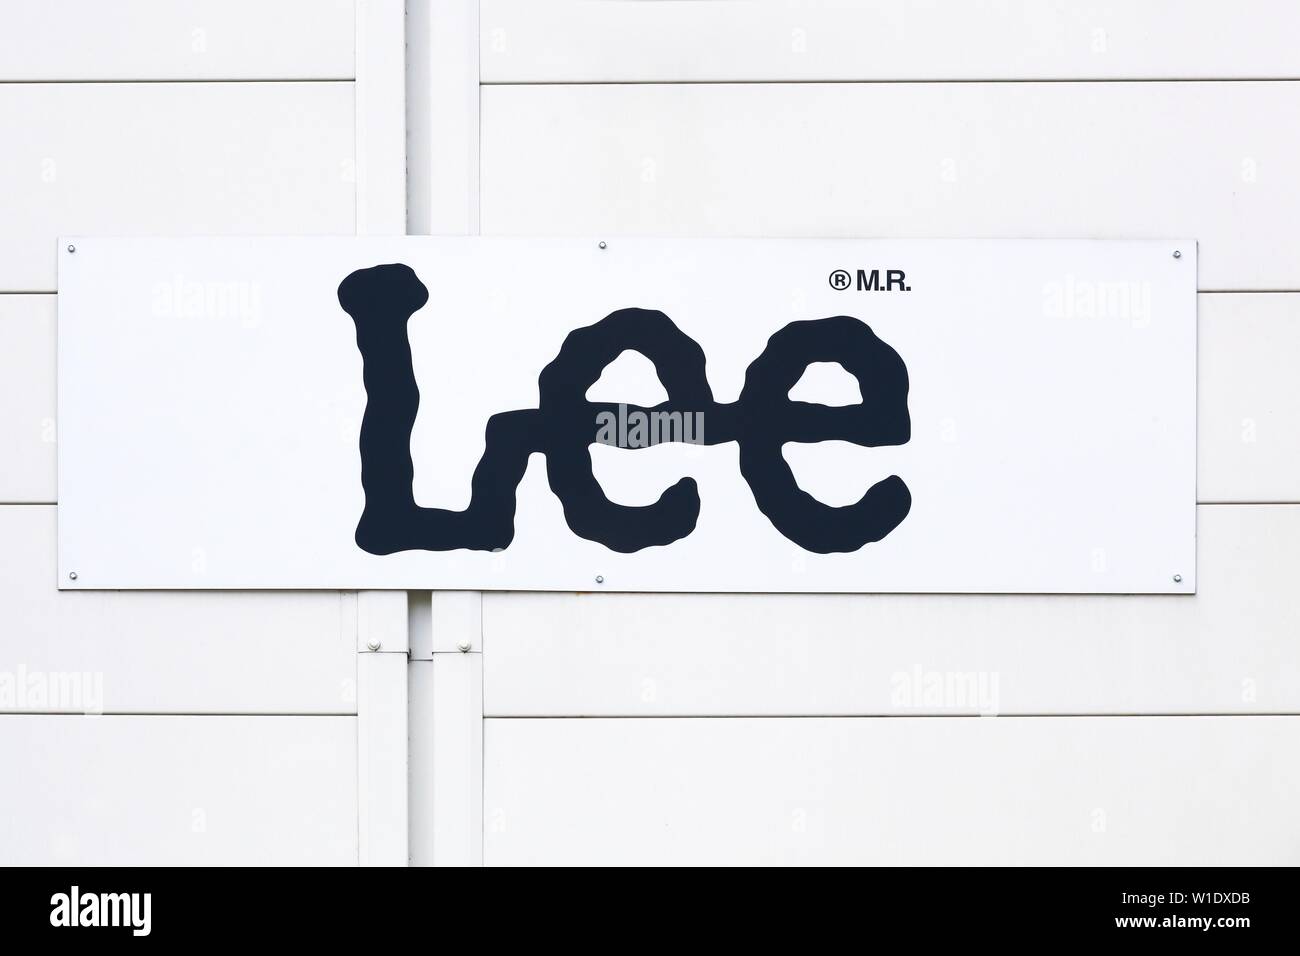 Saint Egreve, France - June 16, 2019: Lee logo on a wall. Lee is an  American brand of denim jeans, first produced in 1889 in Salina, Kansas  Stock Photo - Alamy